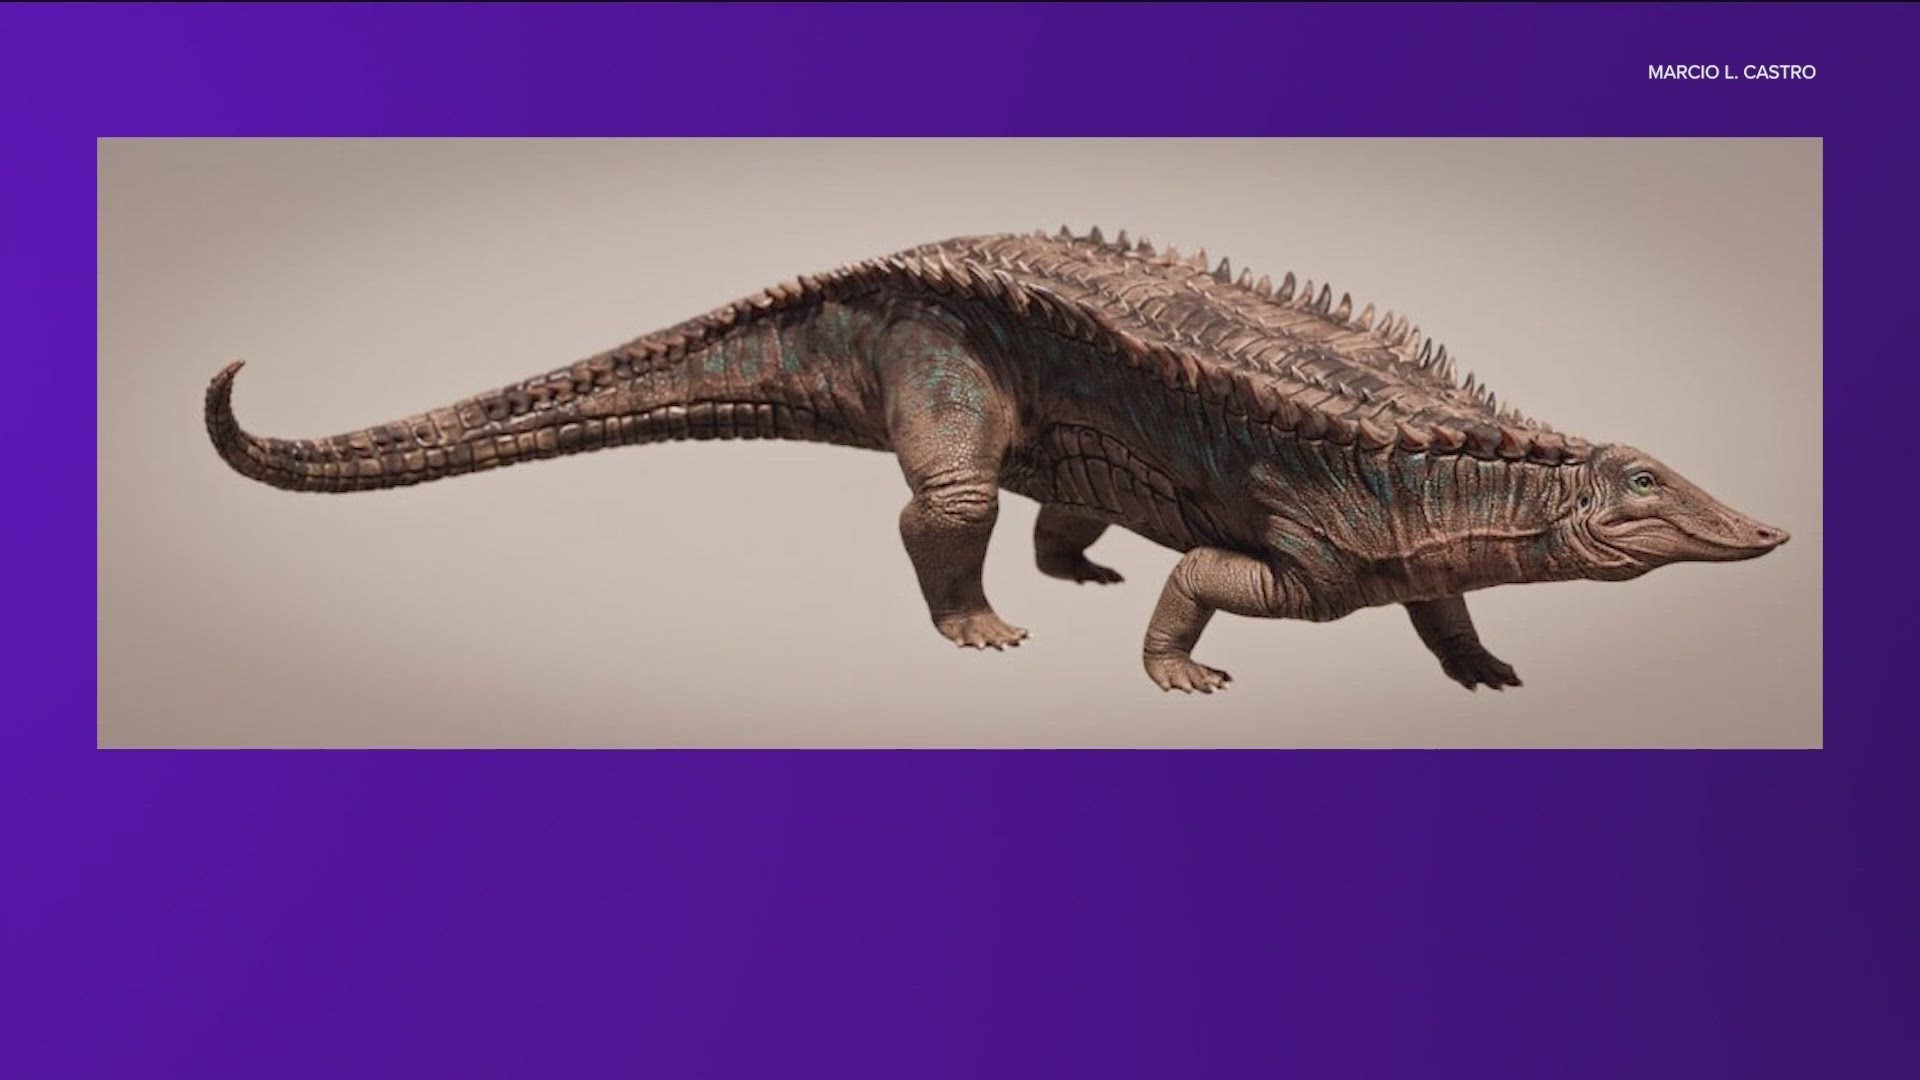 Researchers at the University of Texas at Austin have identified a new ancestor of the modern American crocodile.